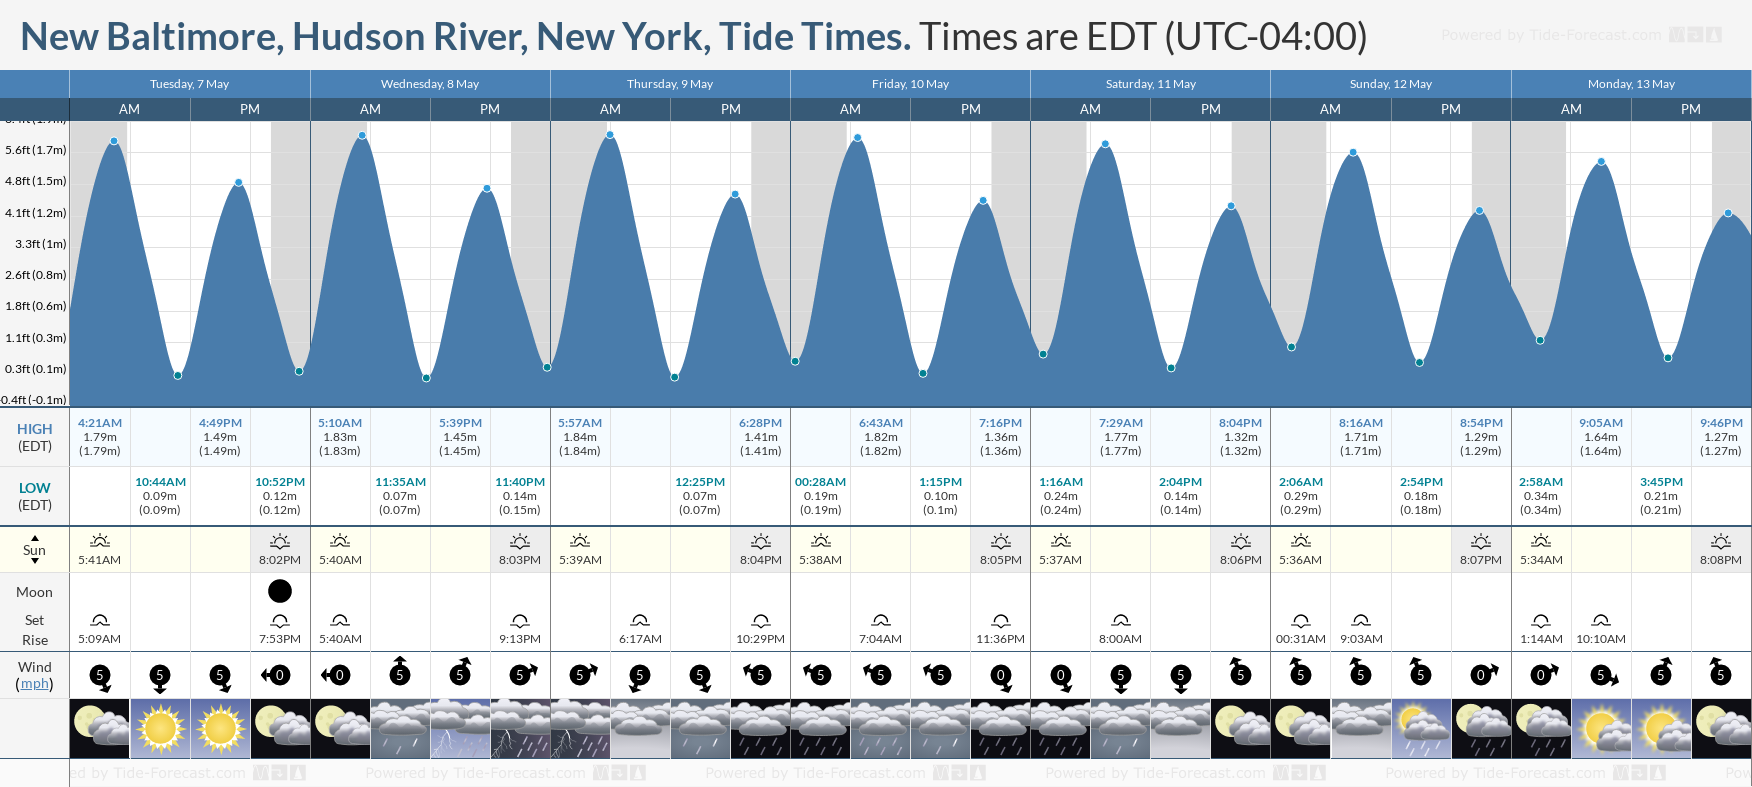 New Baltimore, Hudson River, New York Tide Chart including high and low tide tide times for the next 7 days